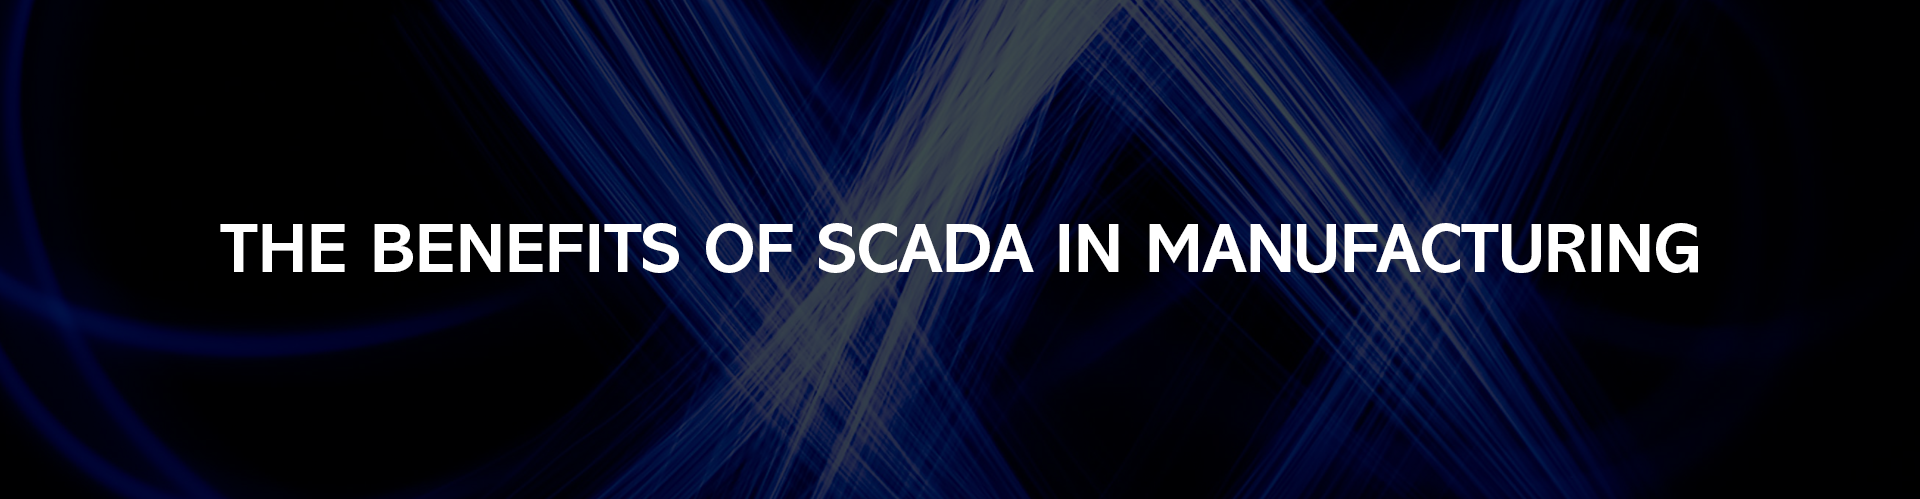 The Benefits of SCADA in Manufacturing